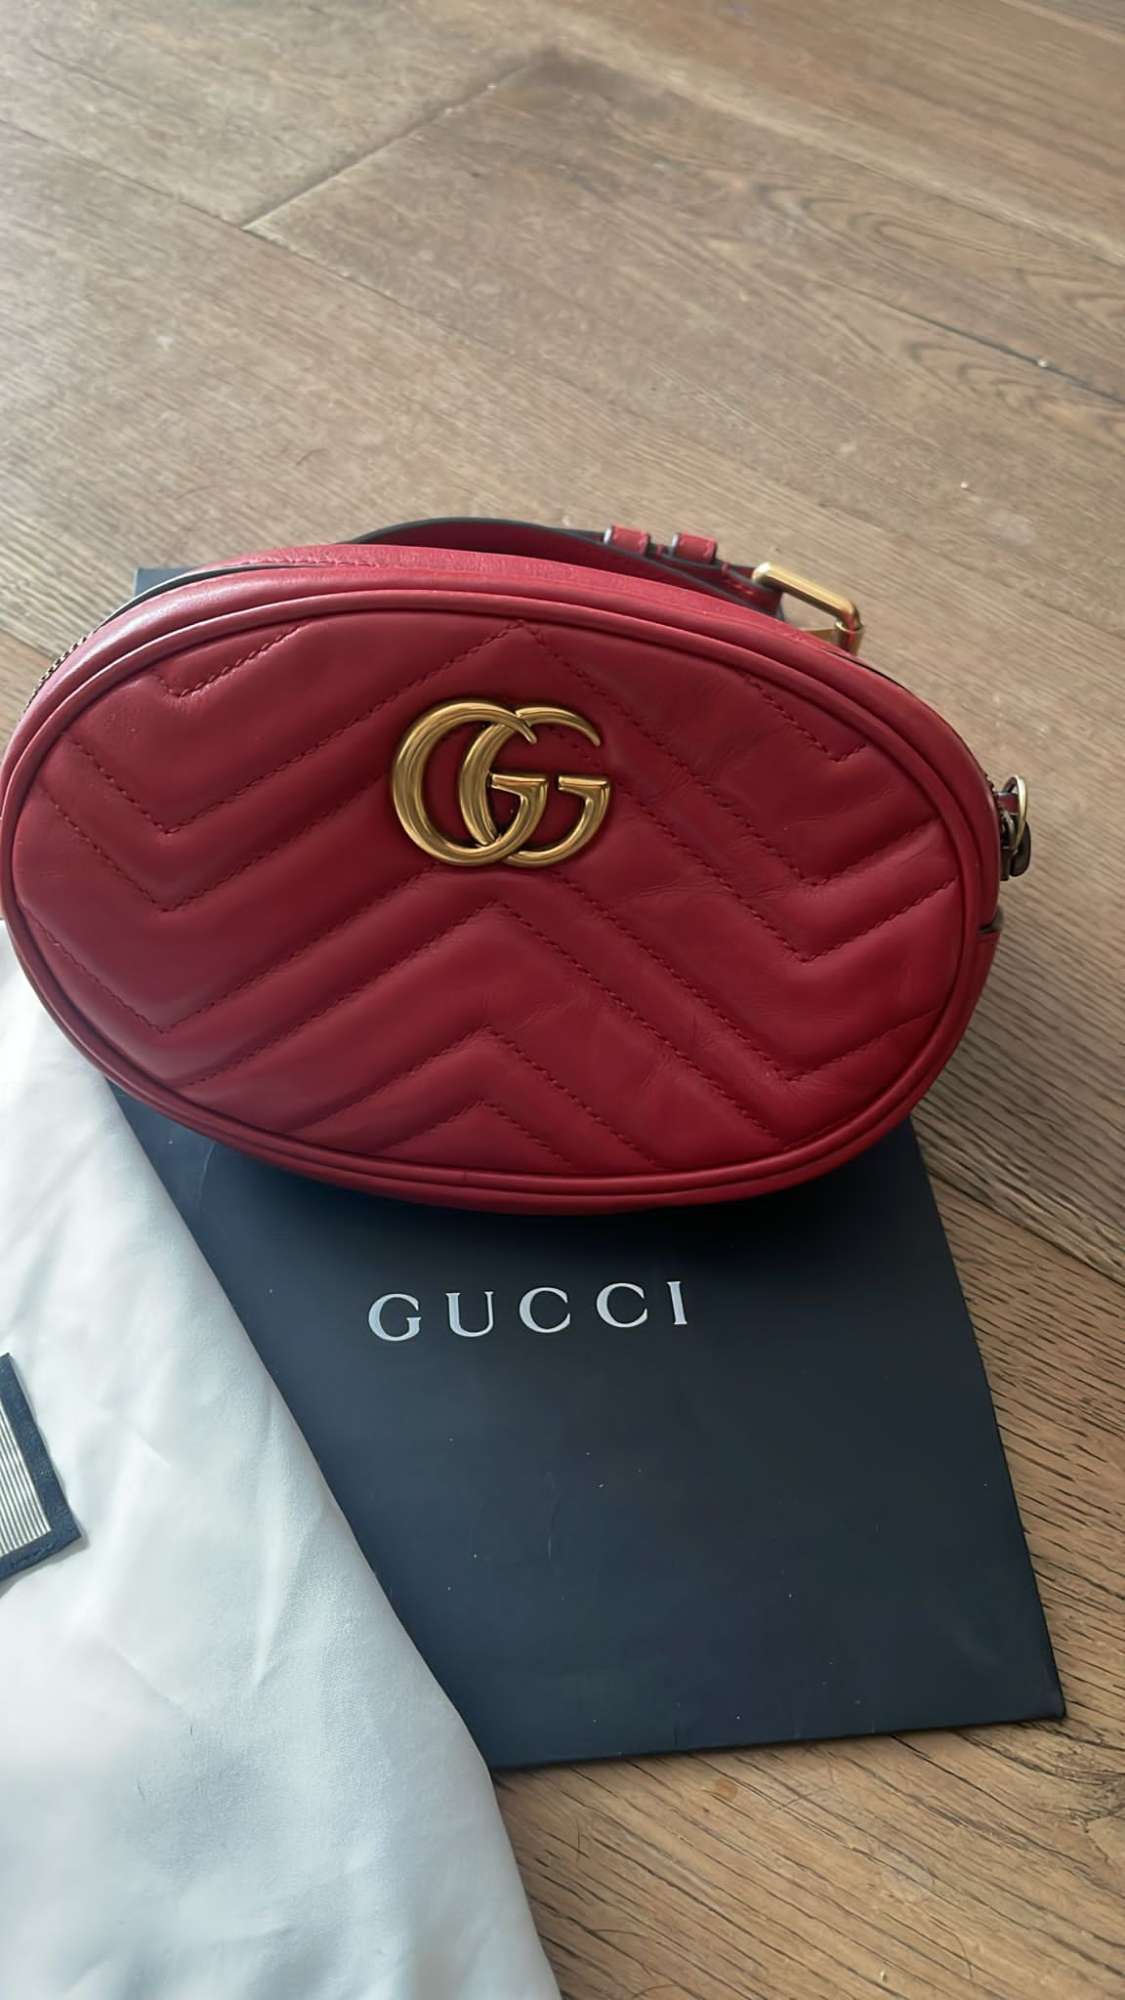 Gucci Quilted Leather Marmont Waist Belt size 85 Bag 18x12x4